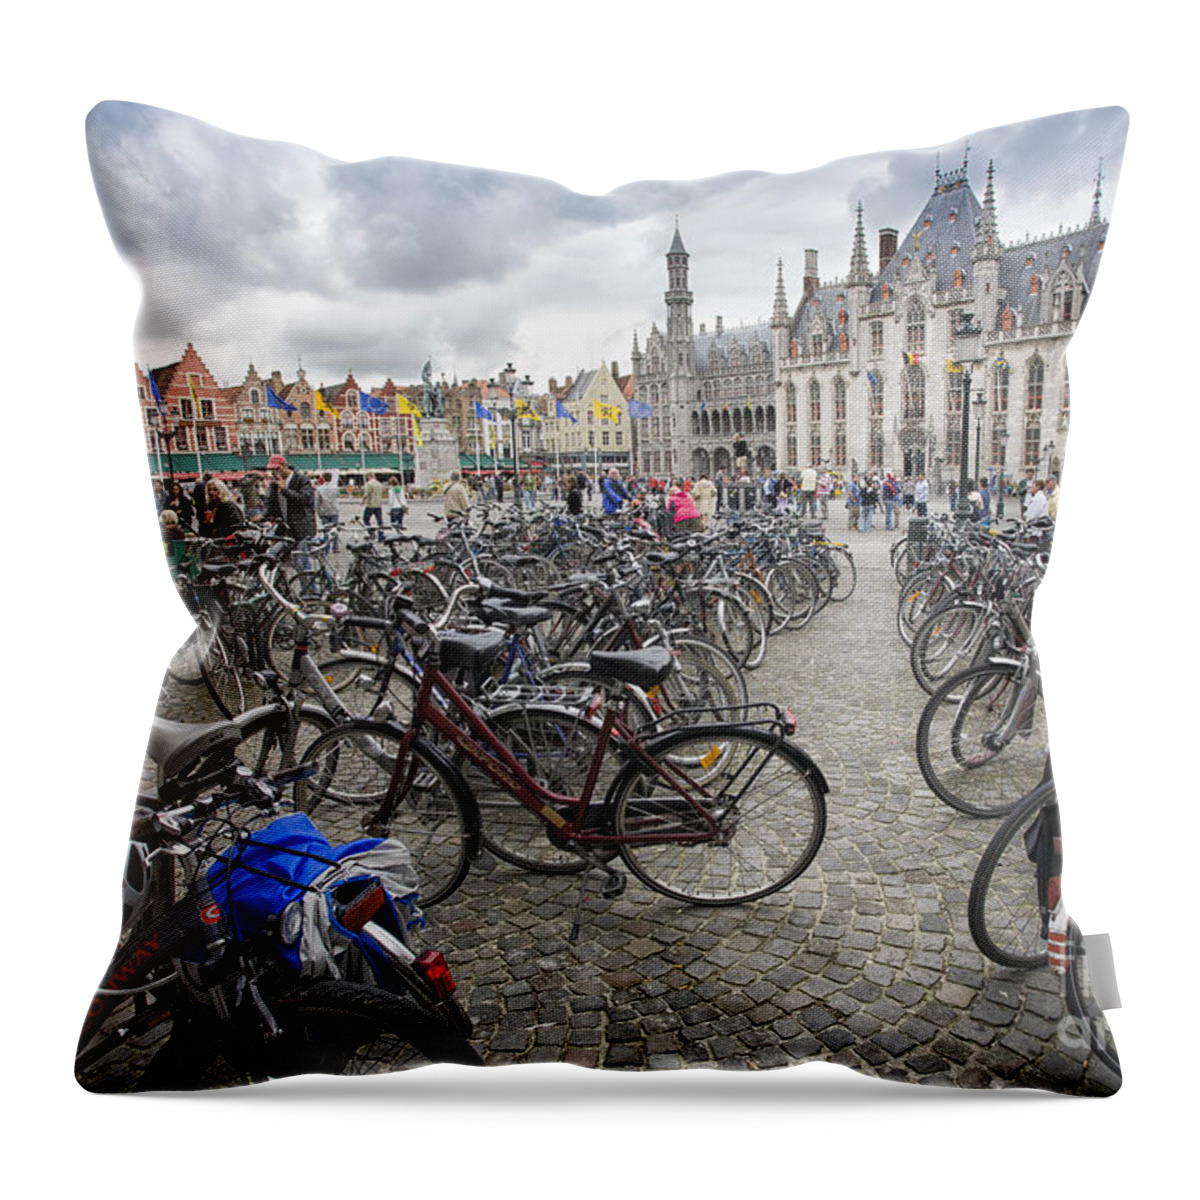 Brugge Throw Pillow featuring the photograph Bicycles in Brugge by Sheila Smart Fine Art Photography